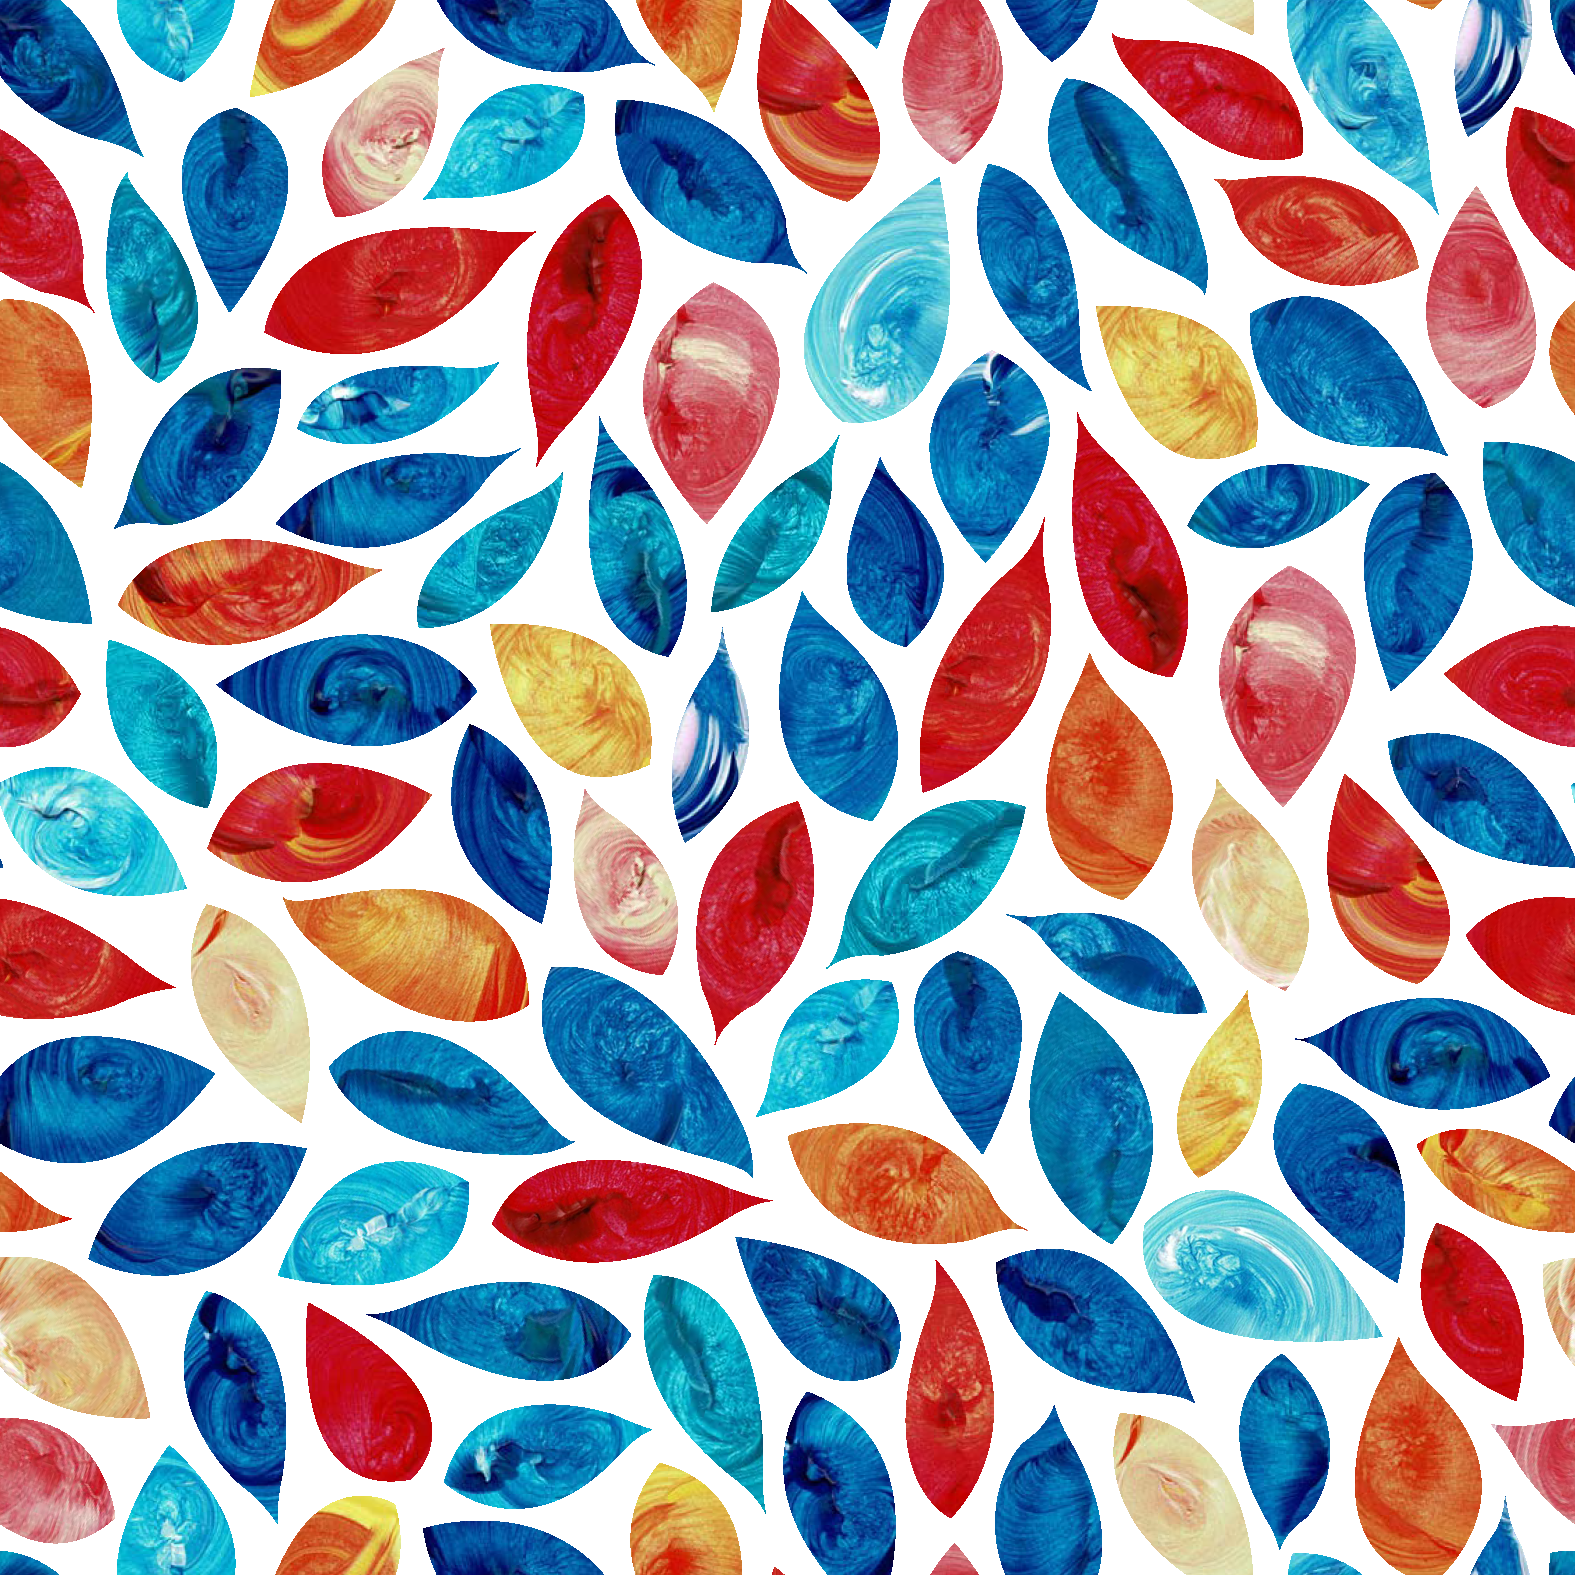 Leaves of Change by Lou Bloomer, winner of the Indigenous branding design competition